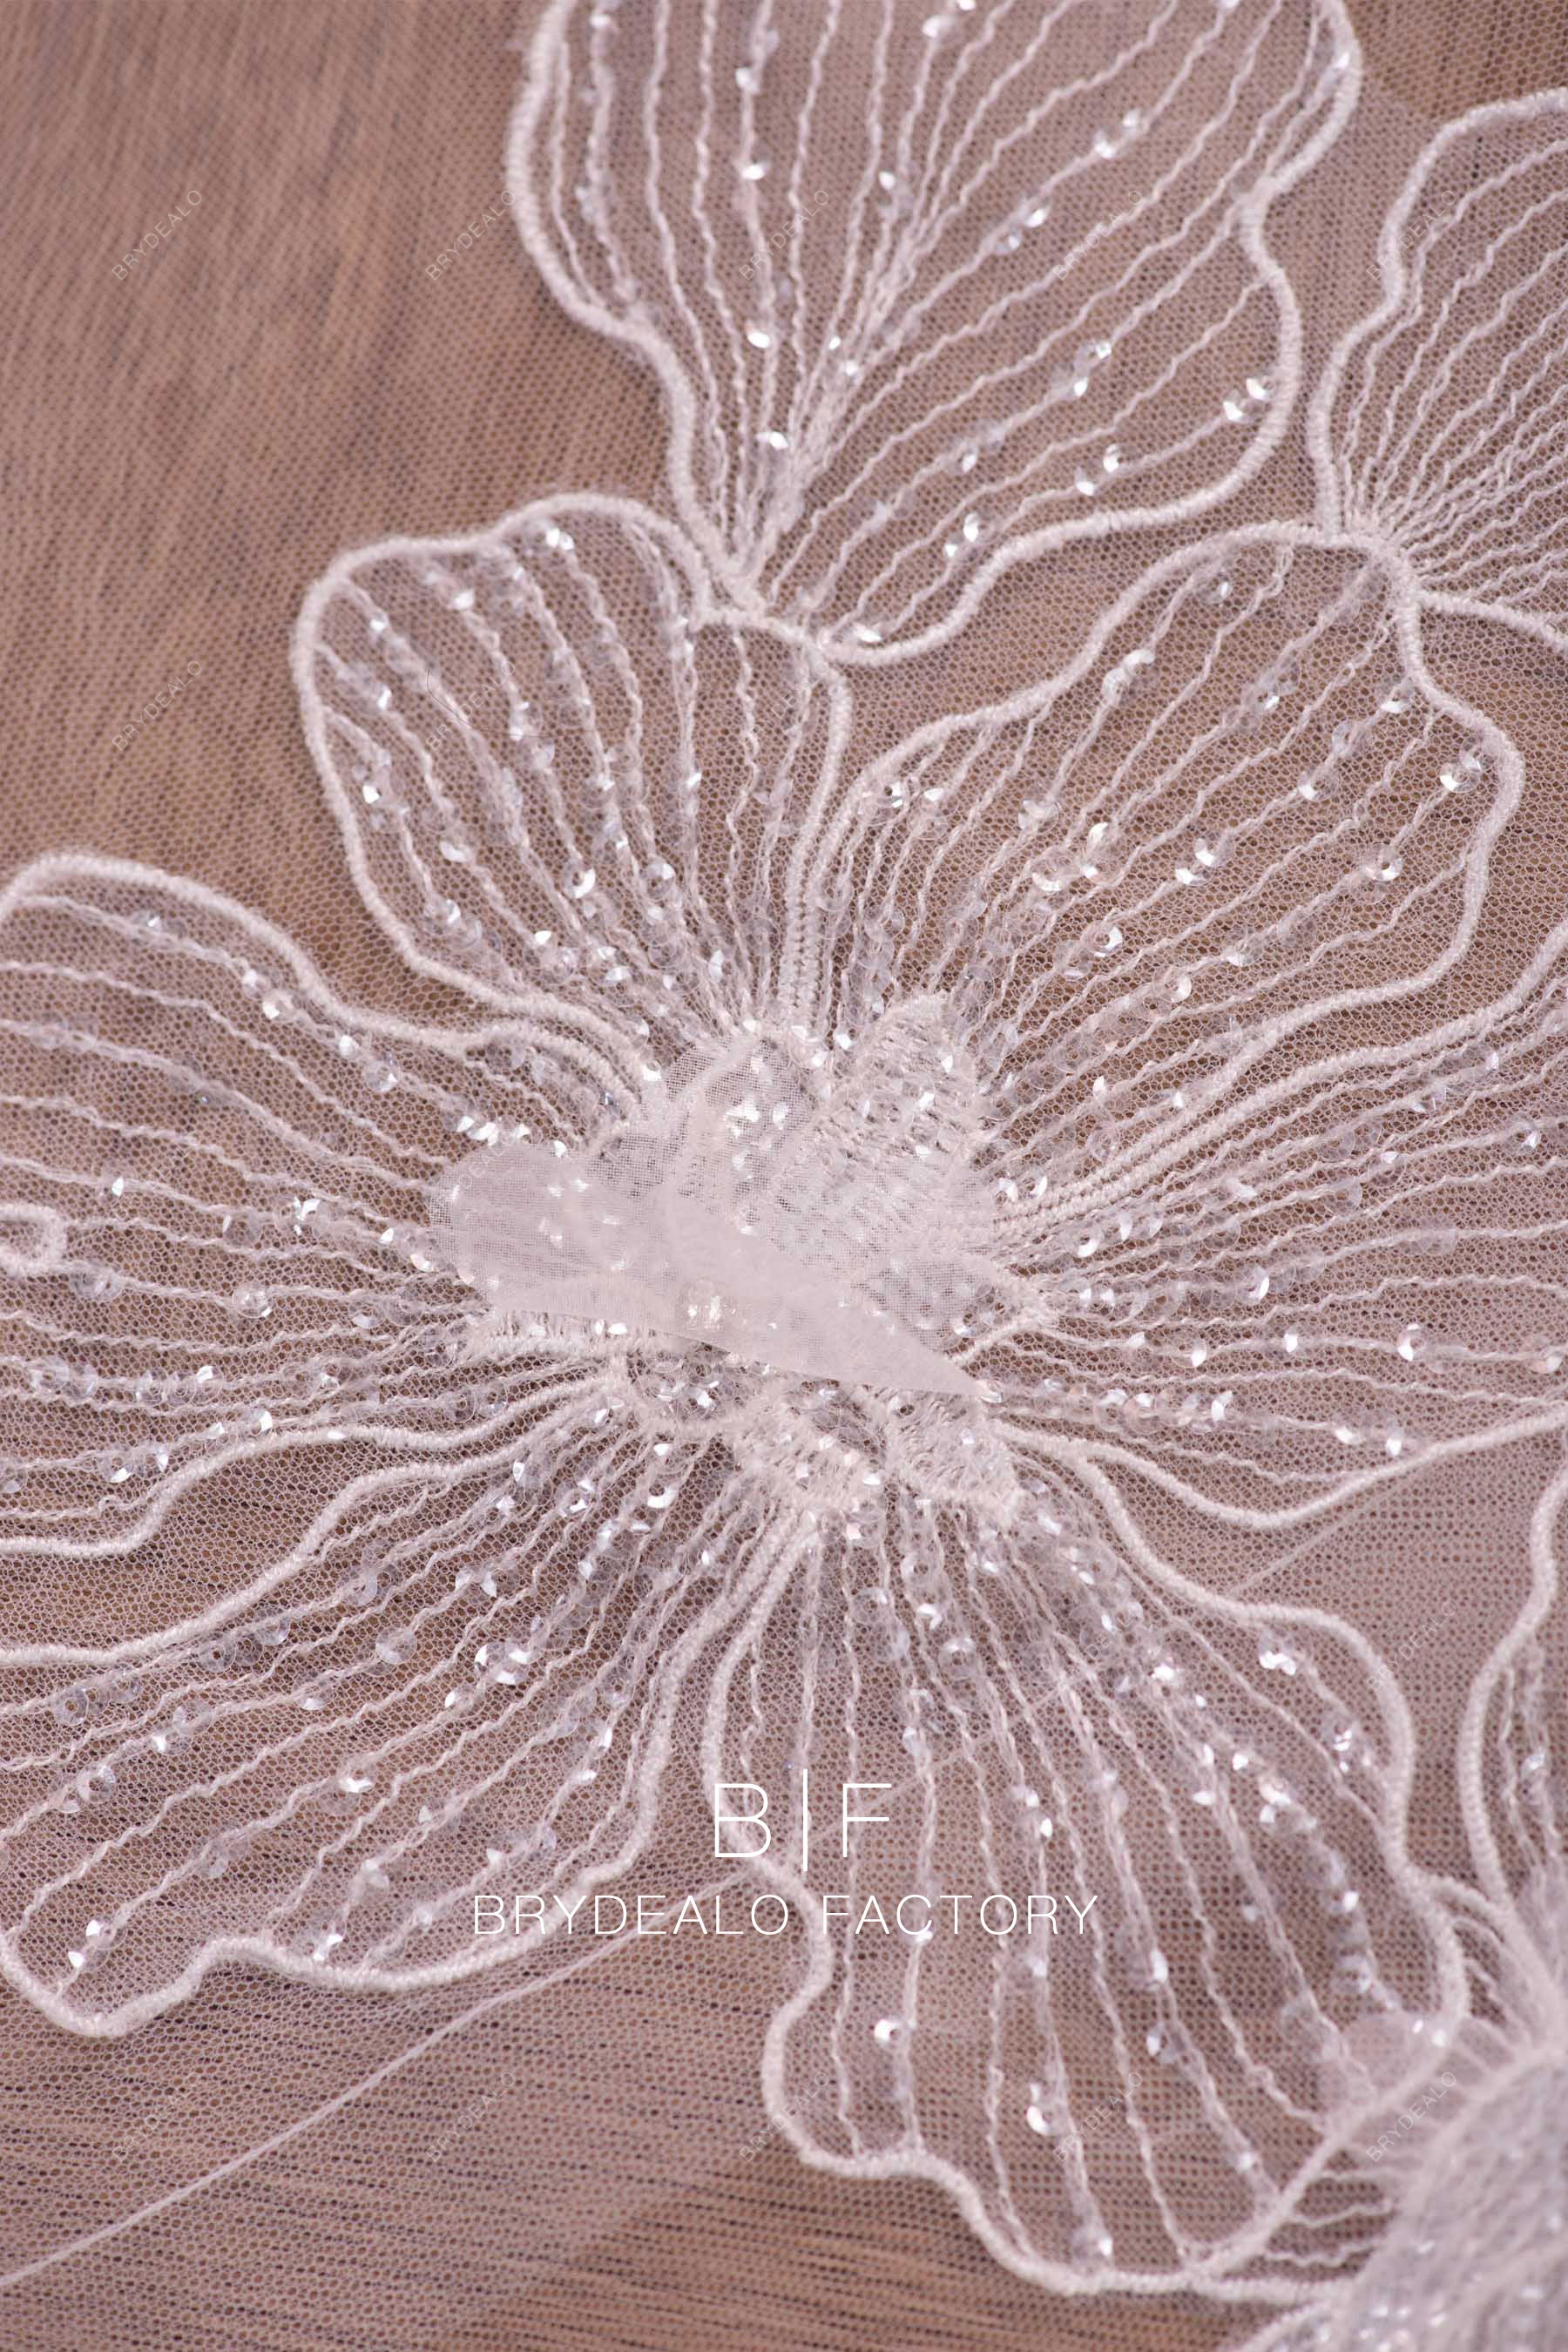 shimmery sequined flower lace